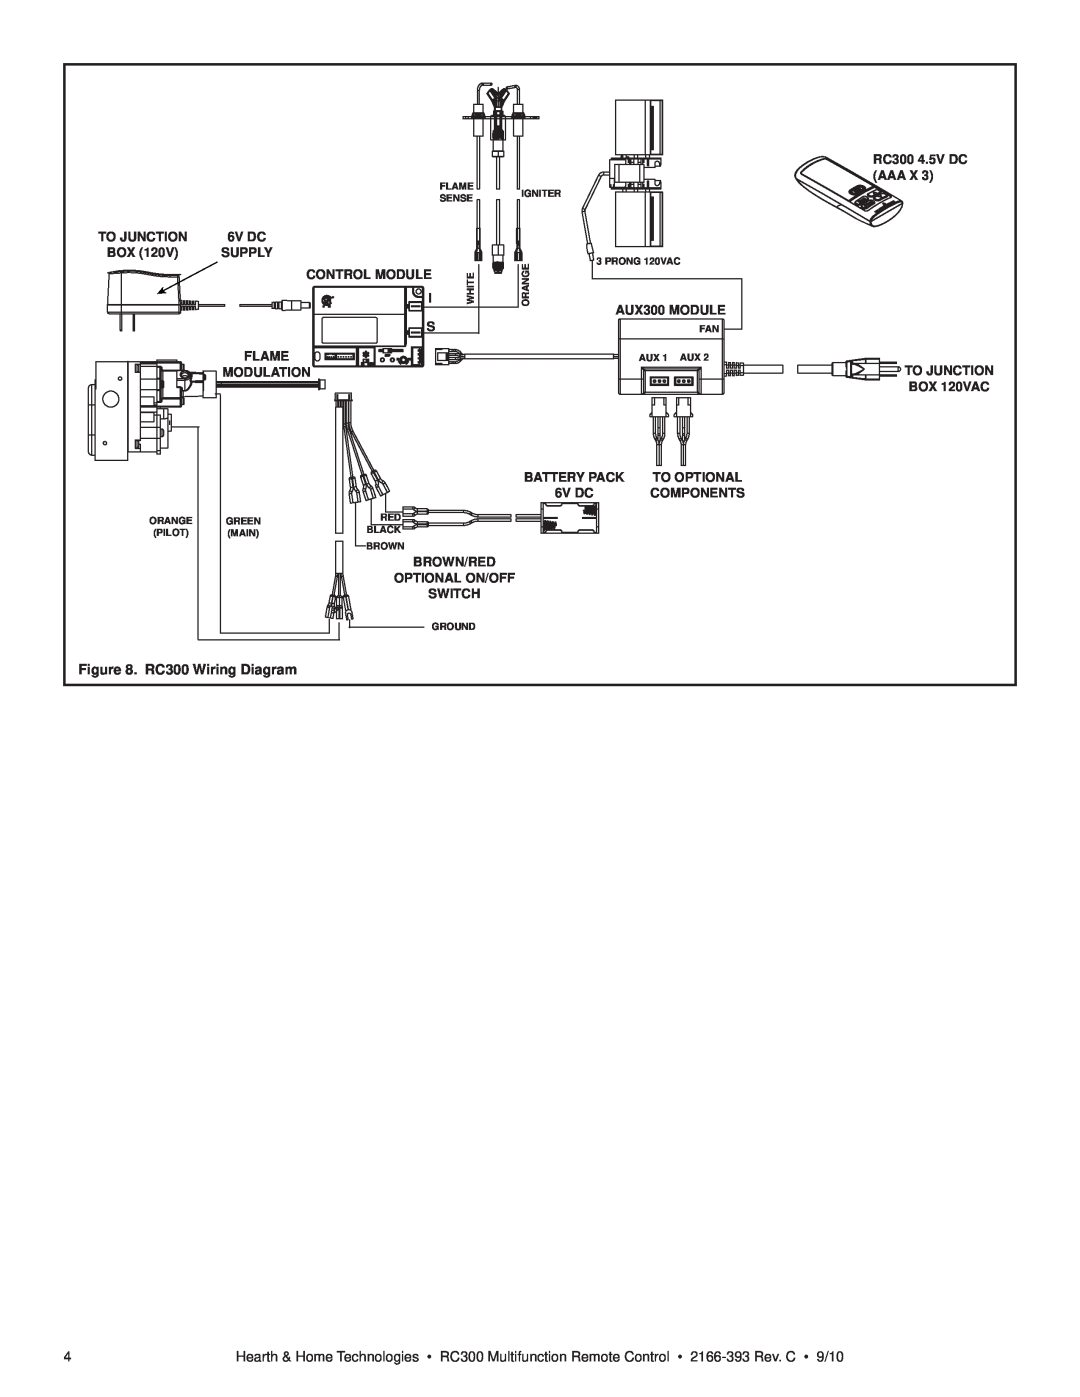 Hearth and Home Technologies operating instructions RC300 Wiring Diagram, BOX 120VAC 